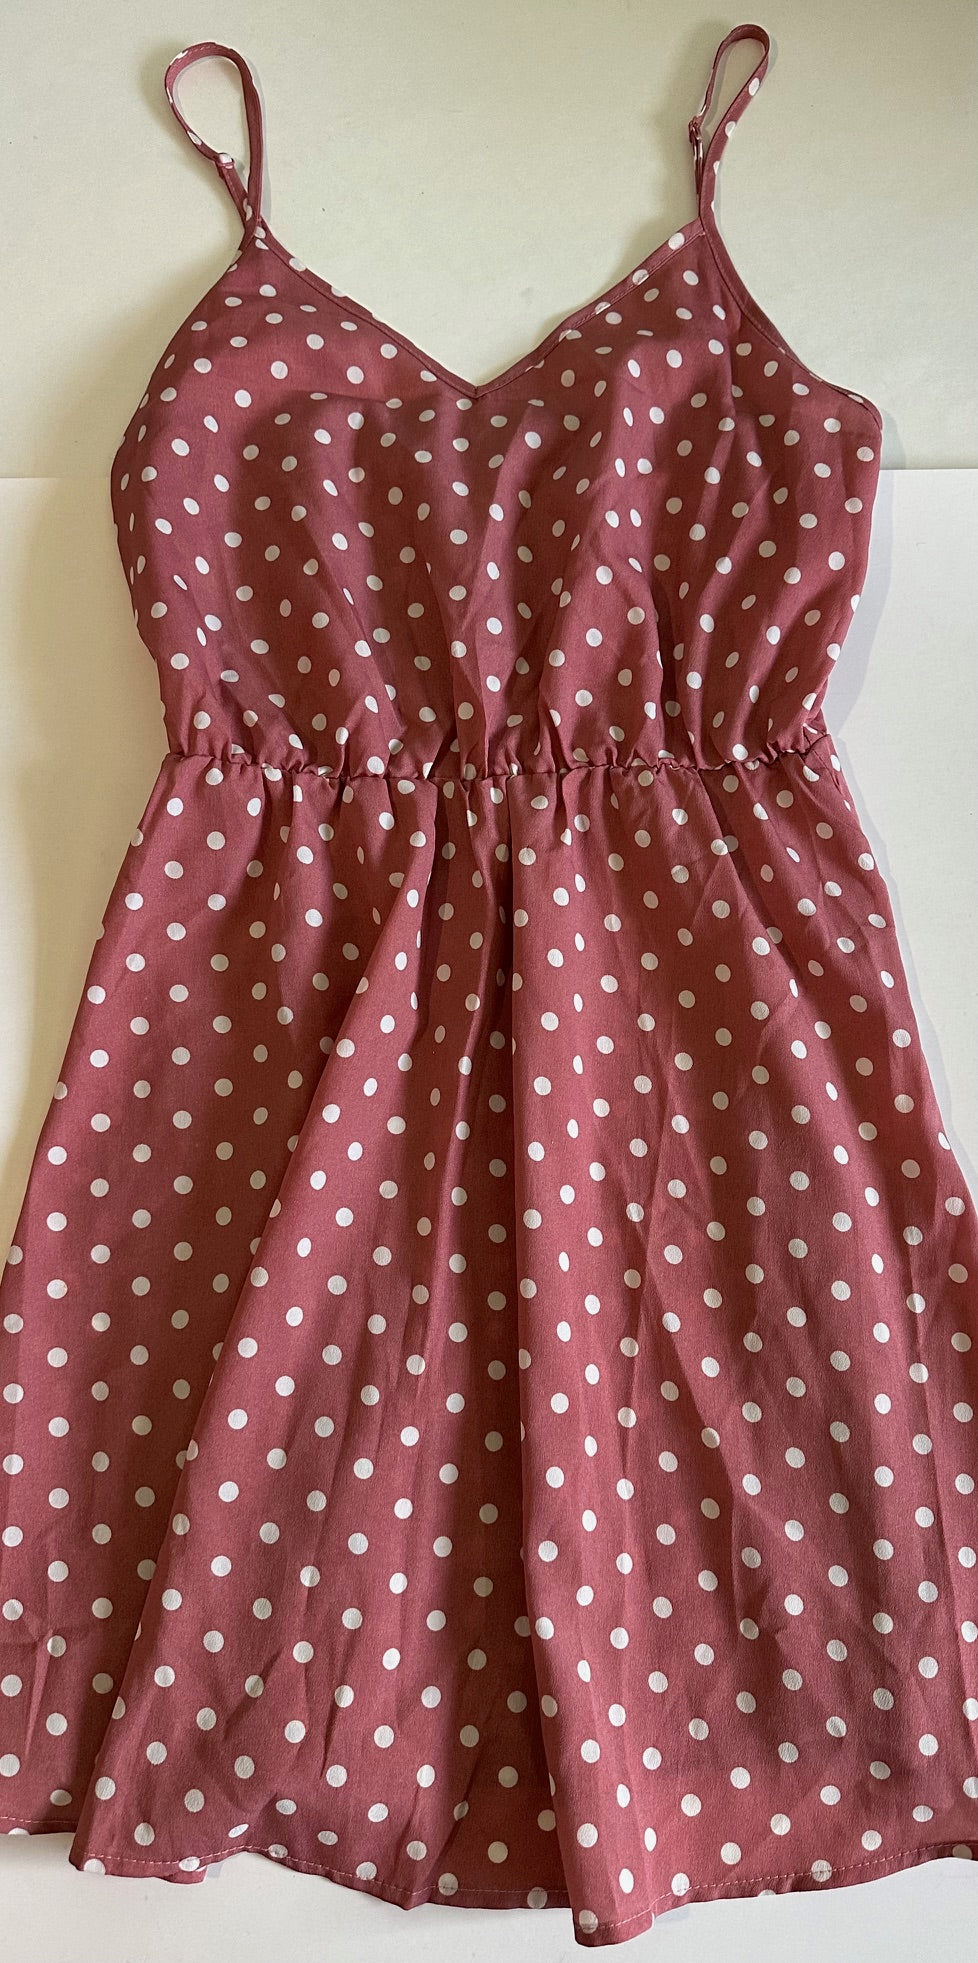 *Adult* Unknown Brand, Dusty Pink Polka-Dot Summer Dress - Size Small